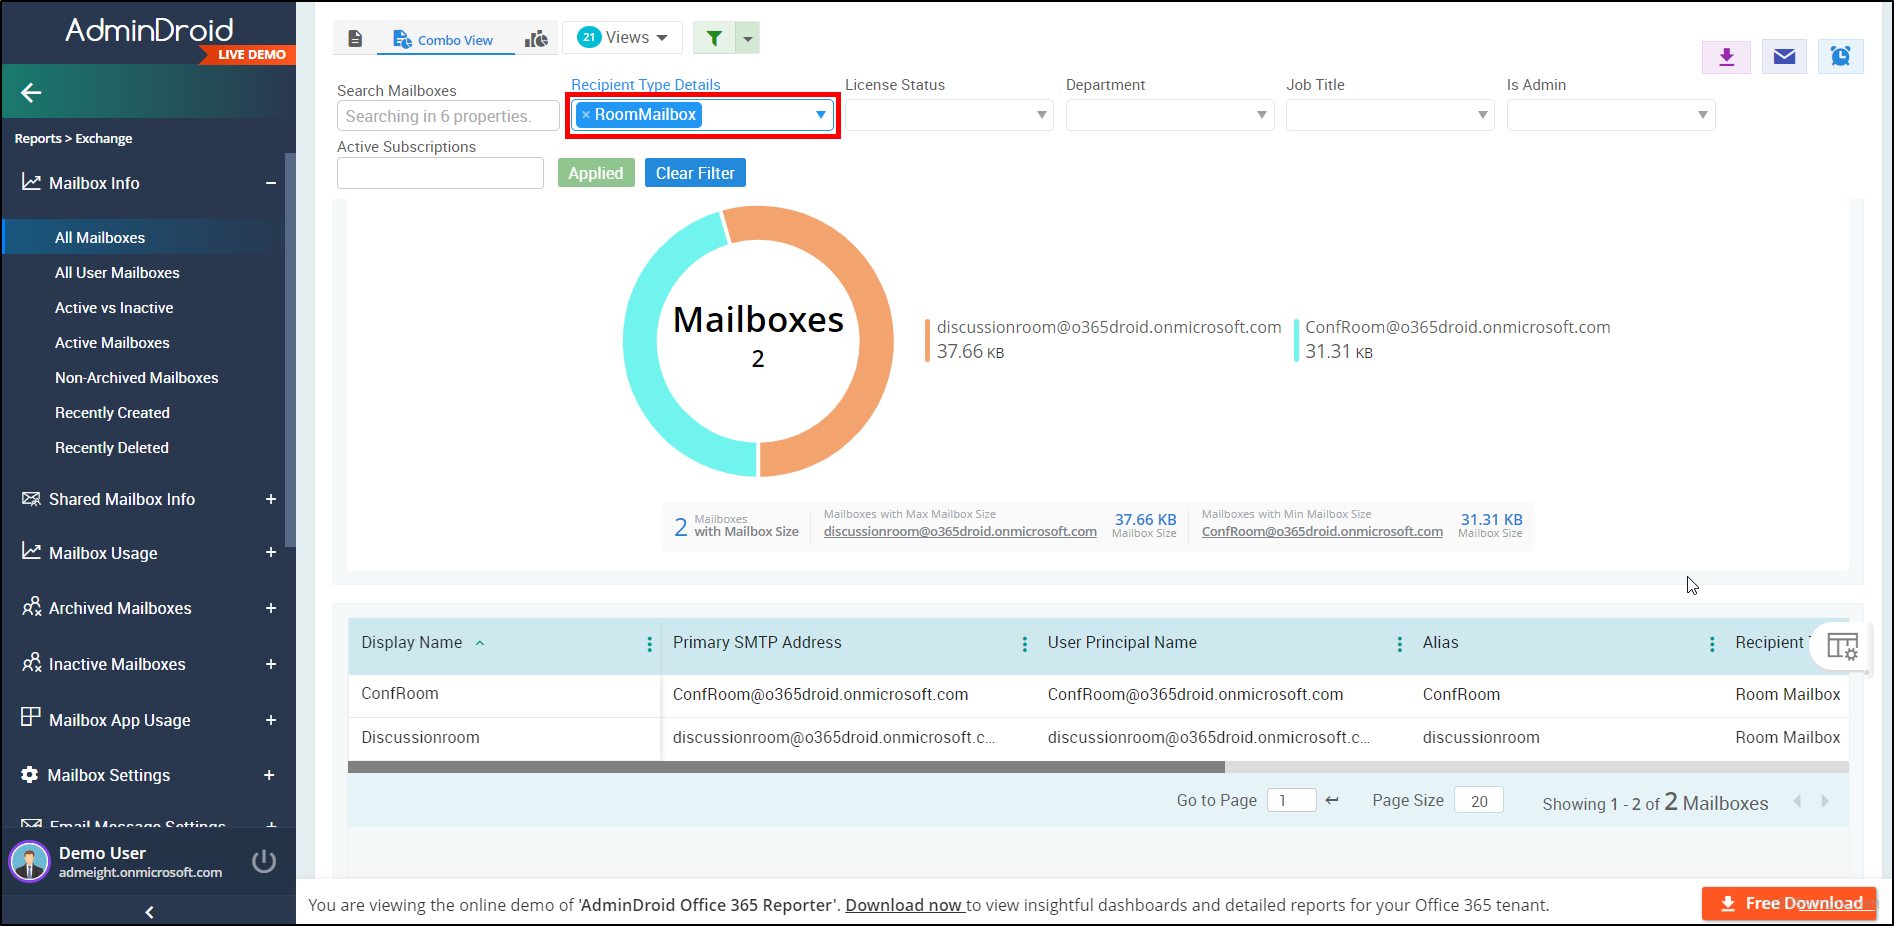 All Mailboxes Report - AdminDroid Office 365 Reporter